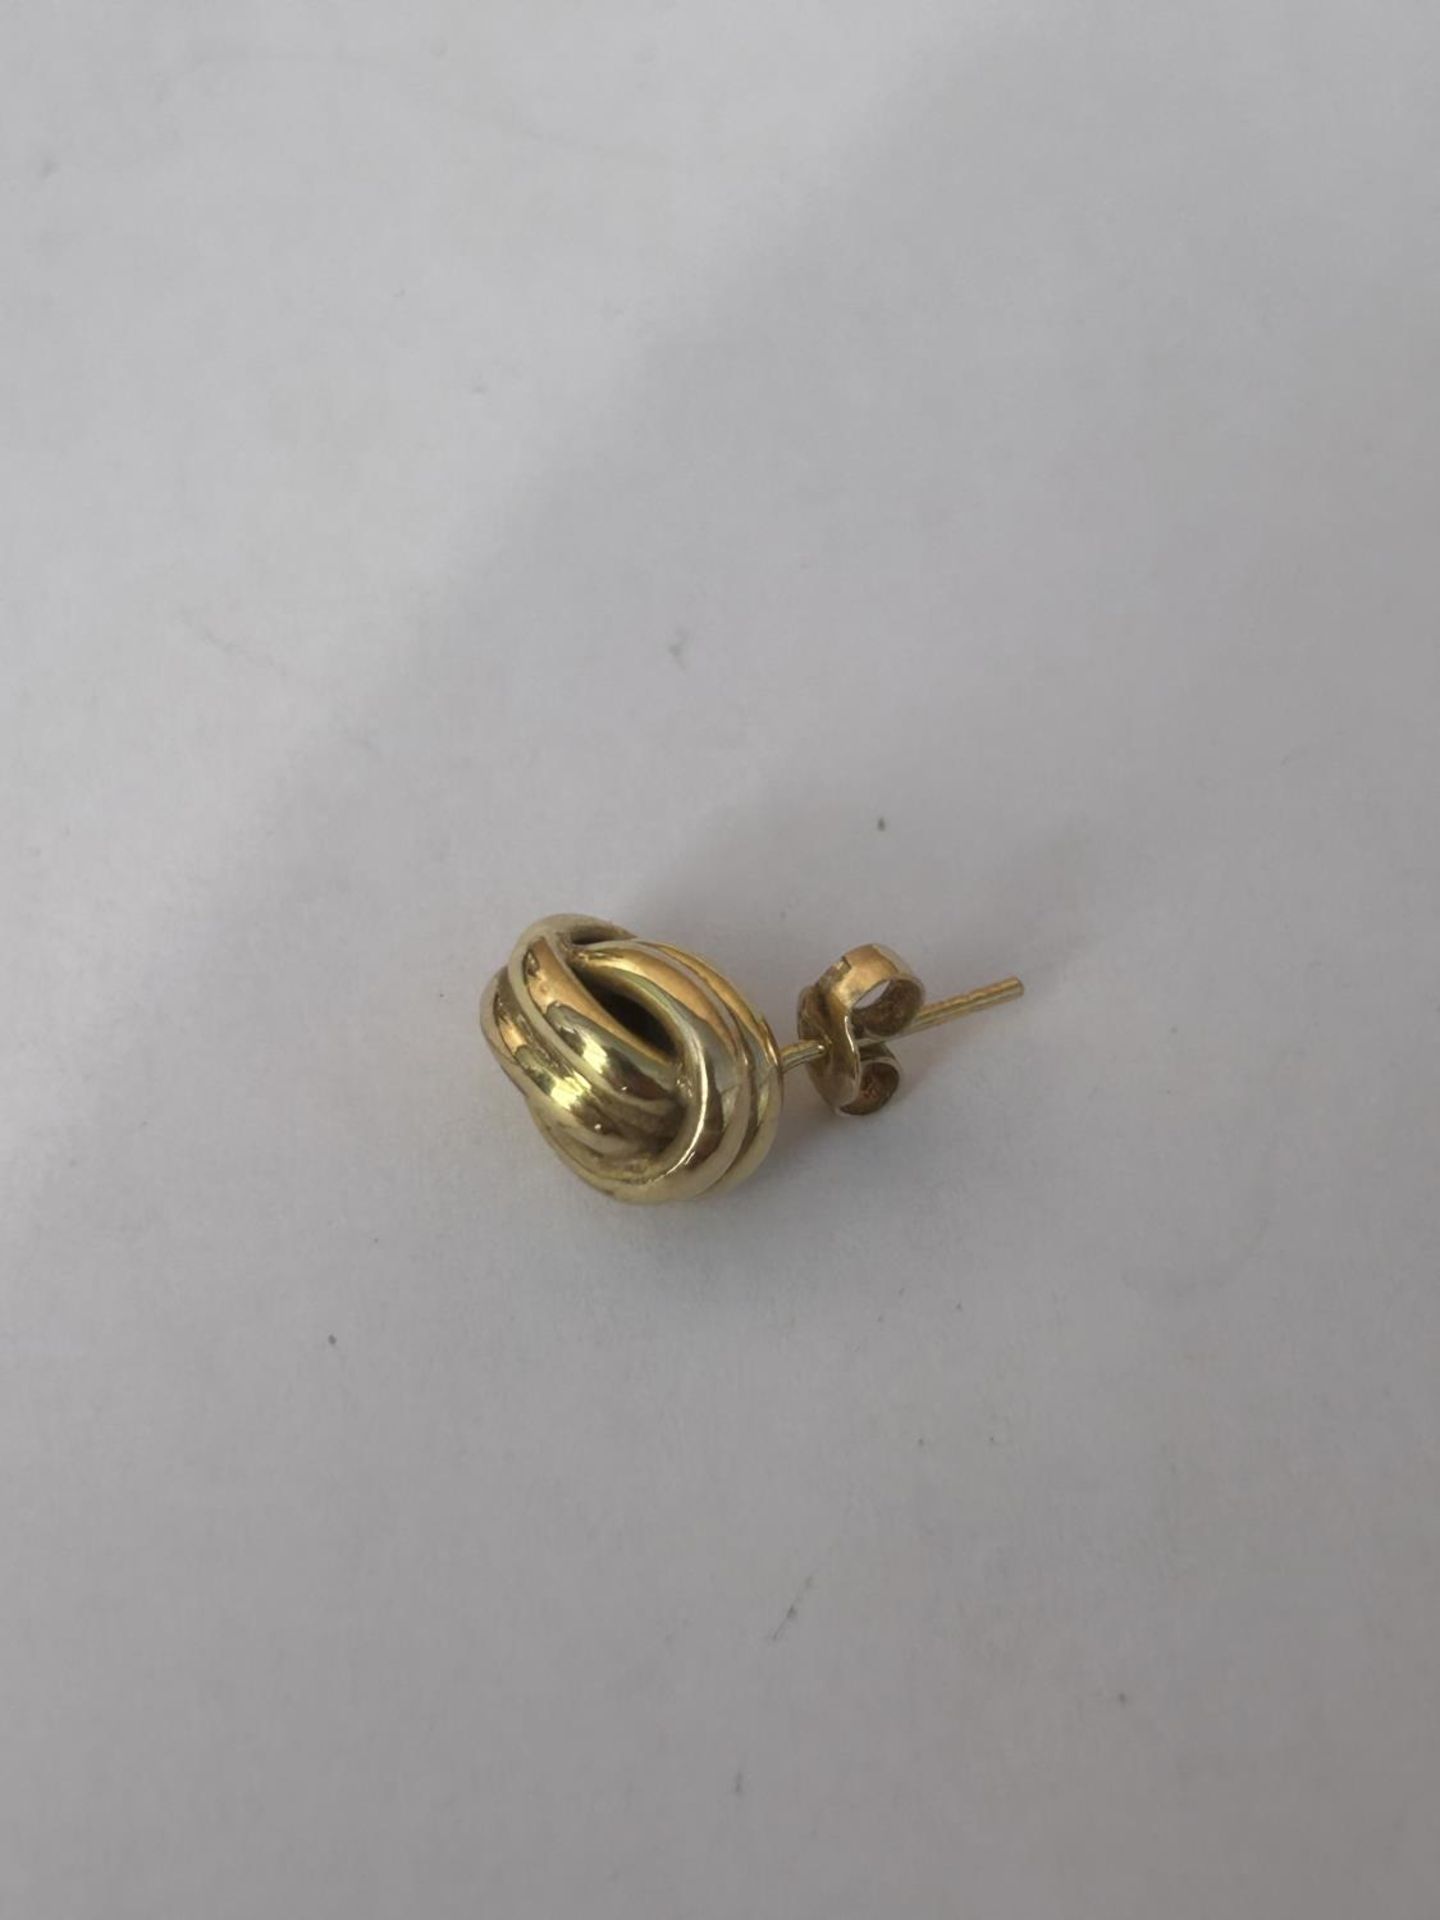 A PAIR OF 9CT GOLD DOUBLE ROW KNOT STUD EARRINGS COMPLETE WITH GOLD BUTTERFLY BACKS AND PRESENTATION - Image 4 of 4